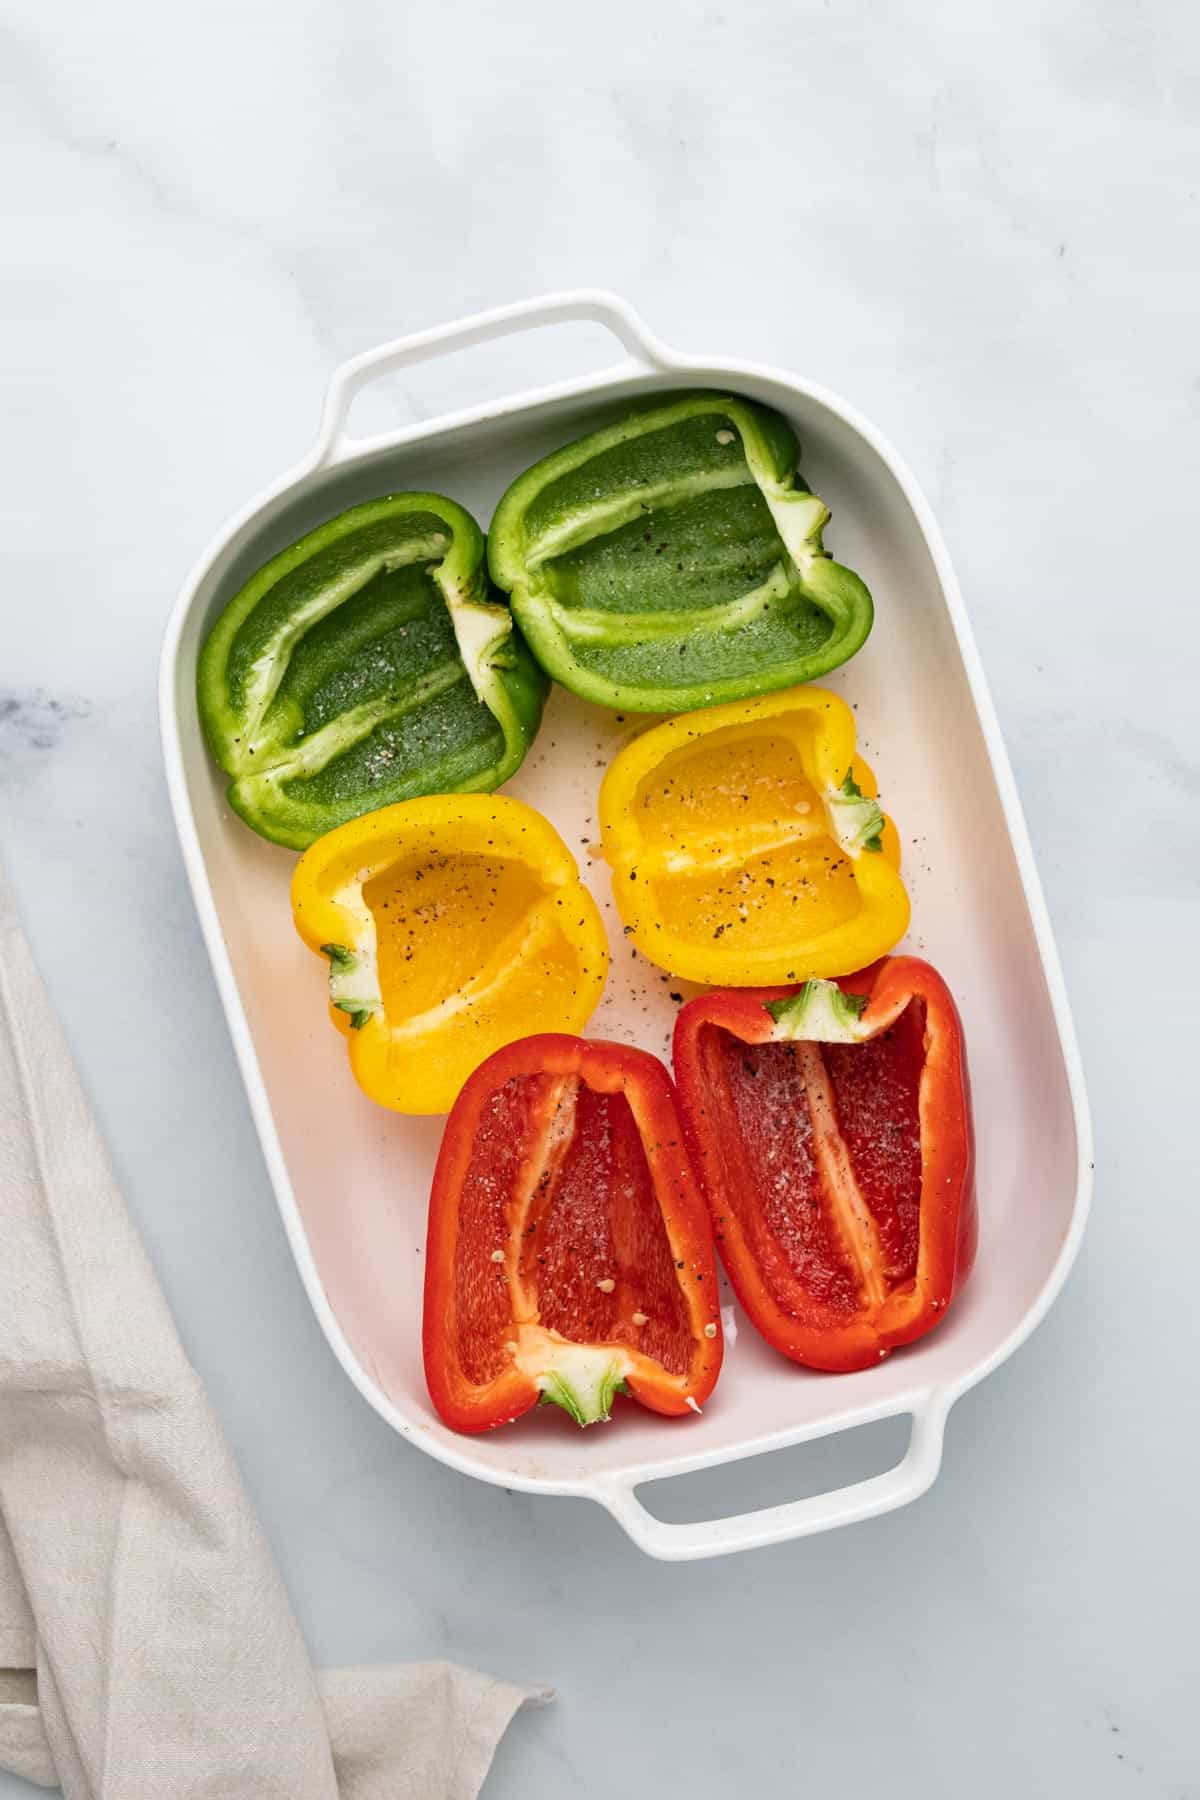 prepared and seasoned peppers in casserole dish